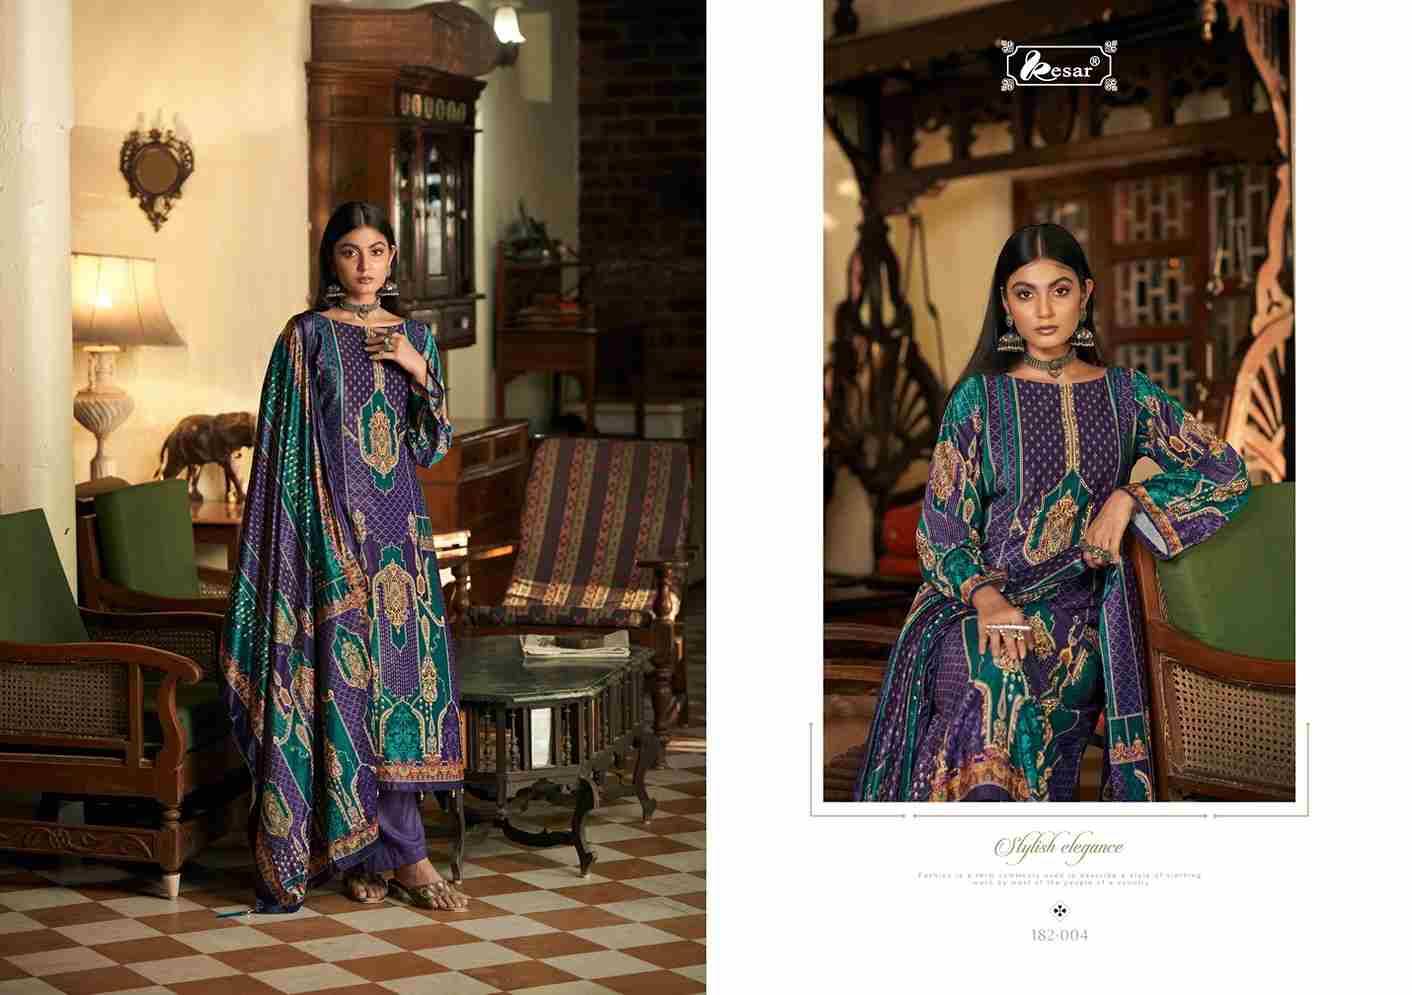 Aasmaa By Kesar 182-001 To 182-006 Series Designer Festive Suits Beautiful Stylish Fancy Colorful Party Wear & Occasional Wear Pure Russian Velvet Dresses At Wholesale Price